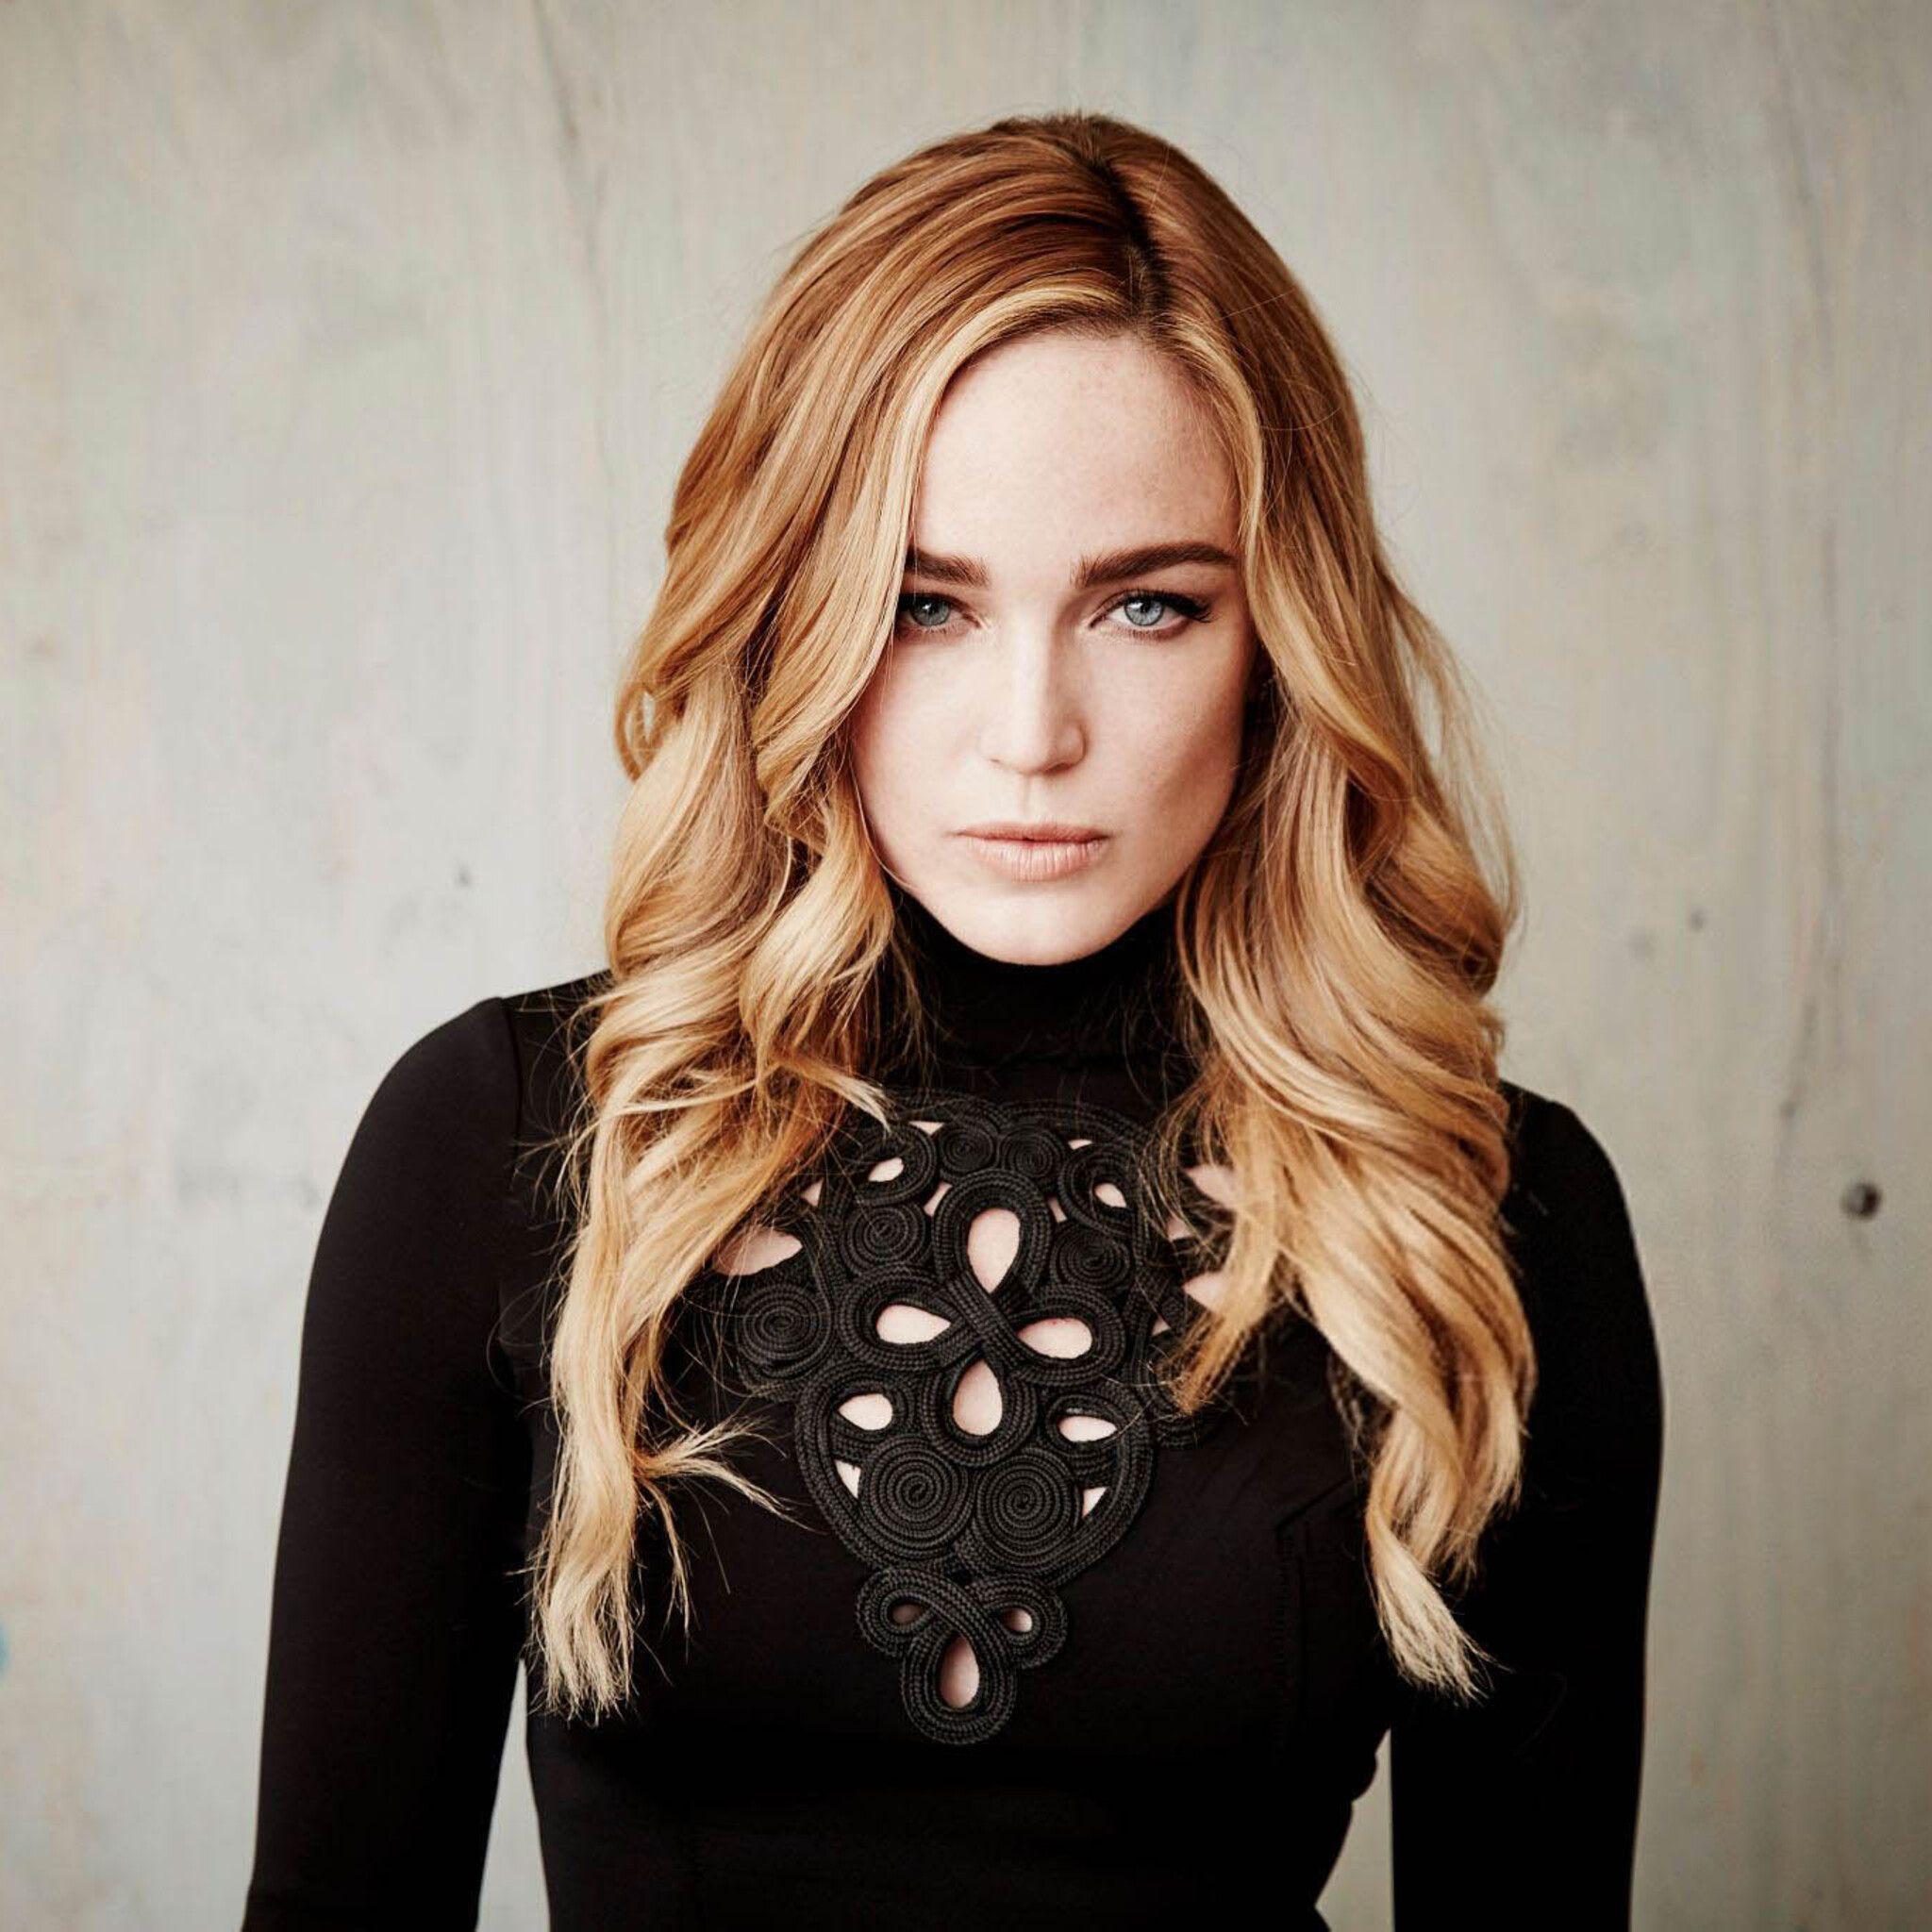 Wallpaper ID 174203  blonde close up caity lotz actress simple  background free download